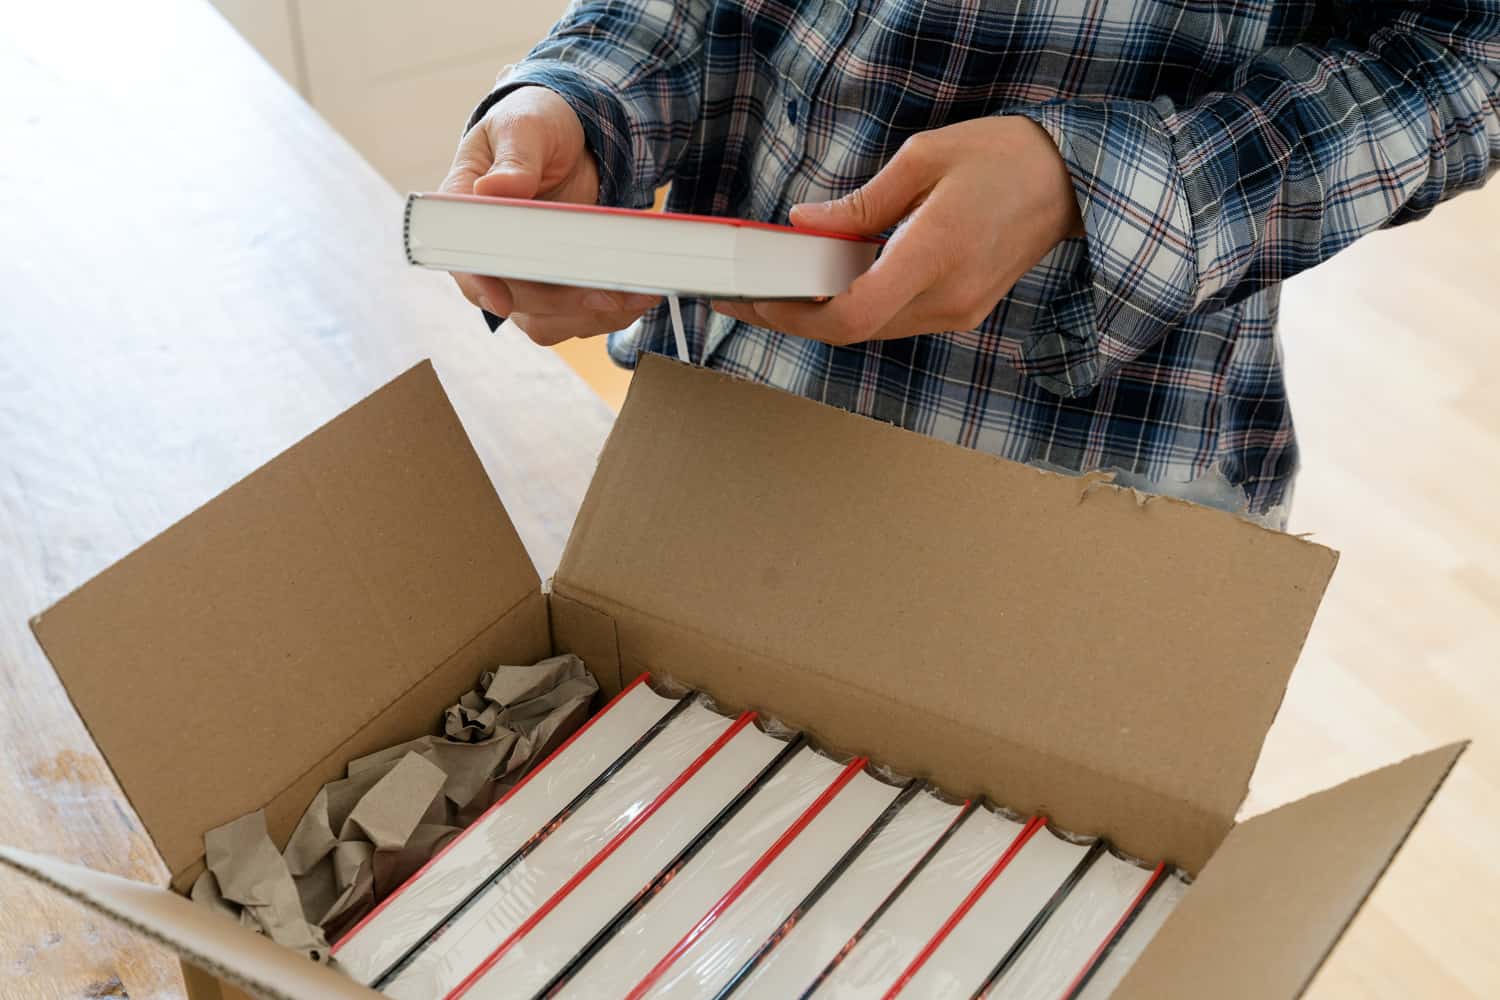 author opens package with samples of her new book and checks the hardcover edition carefully